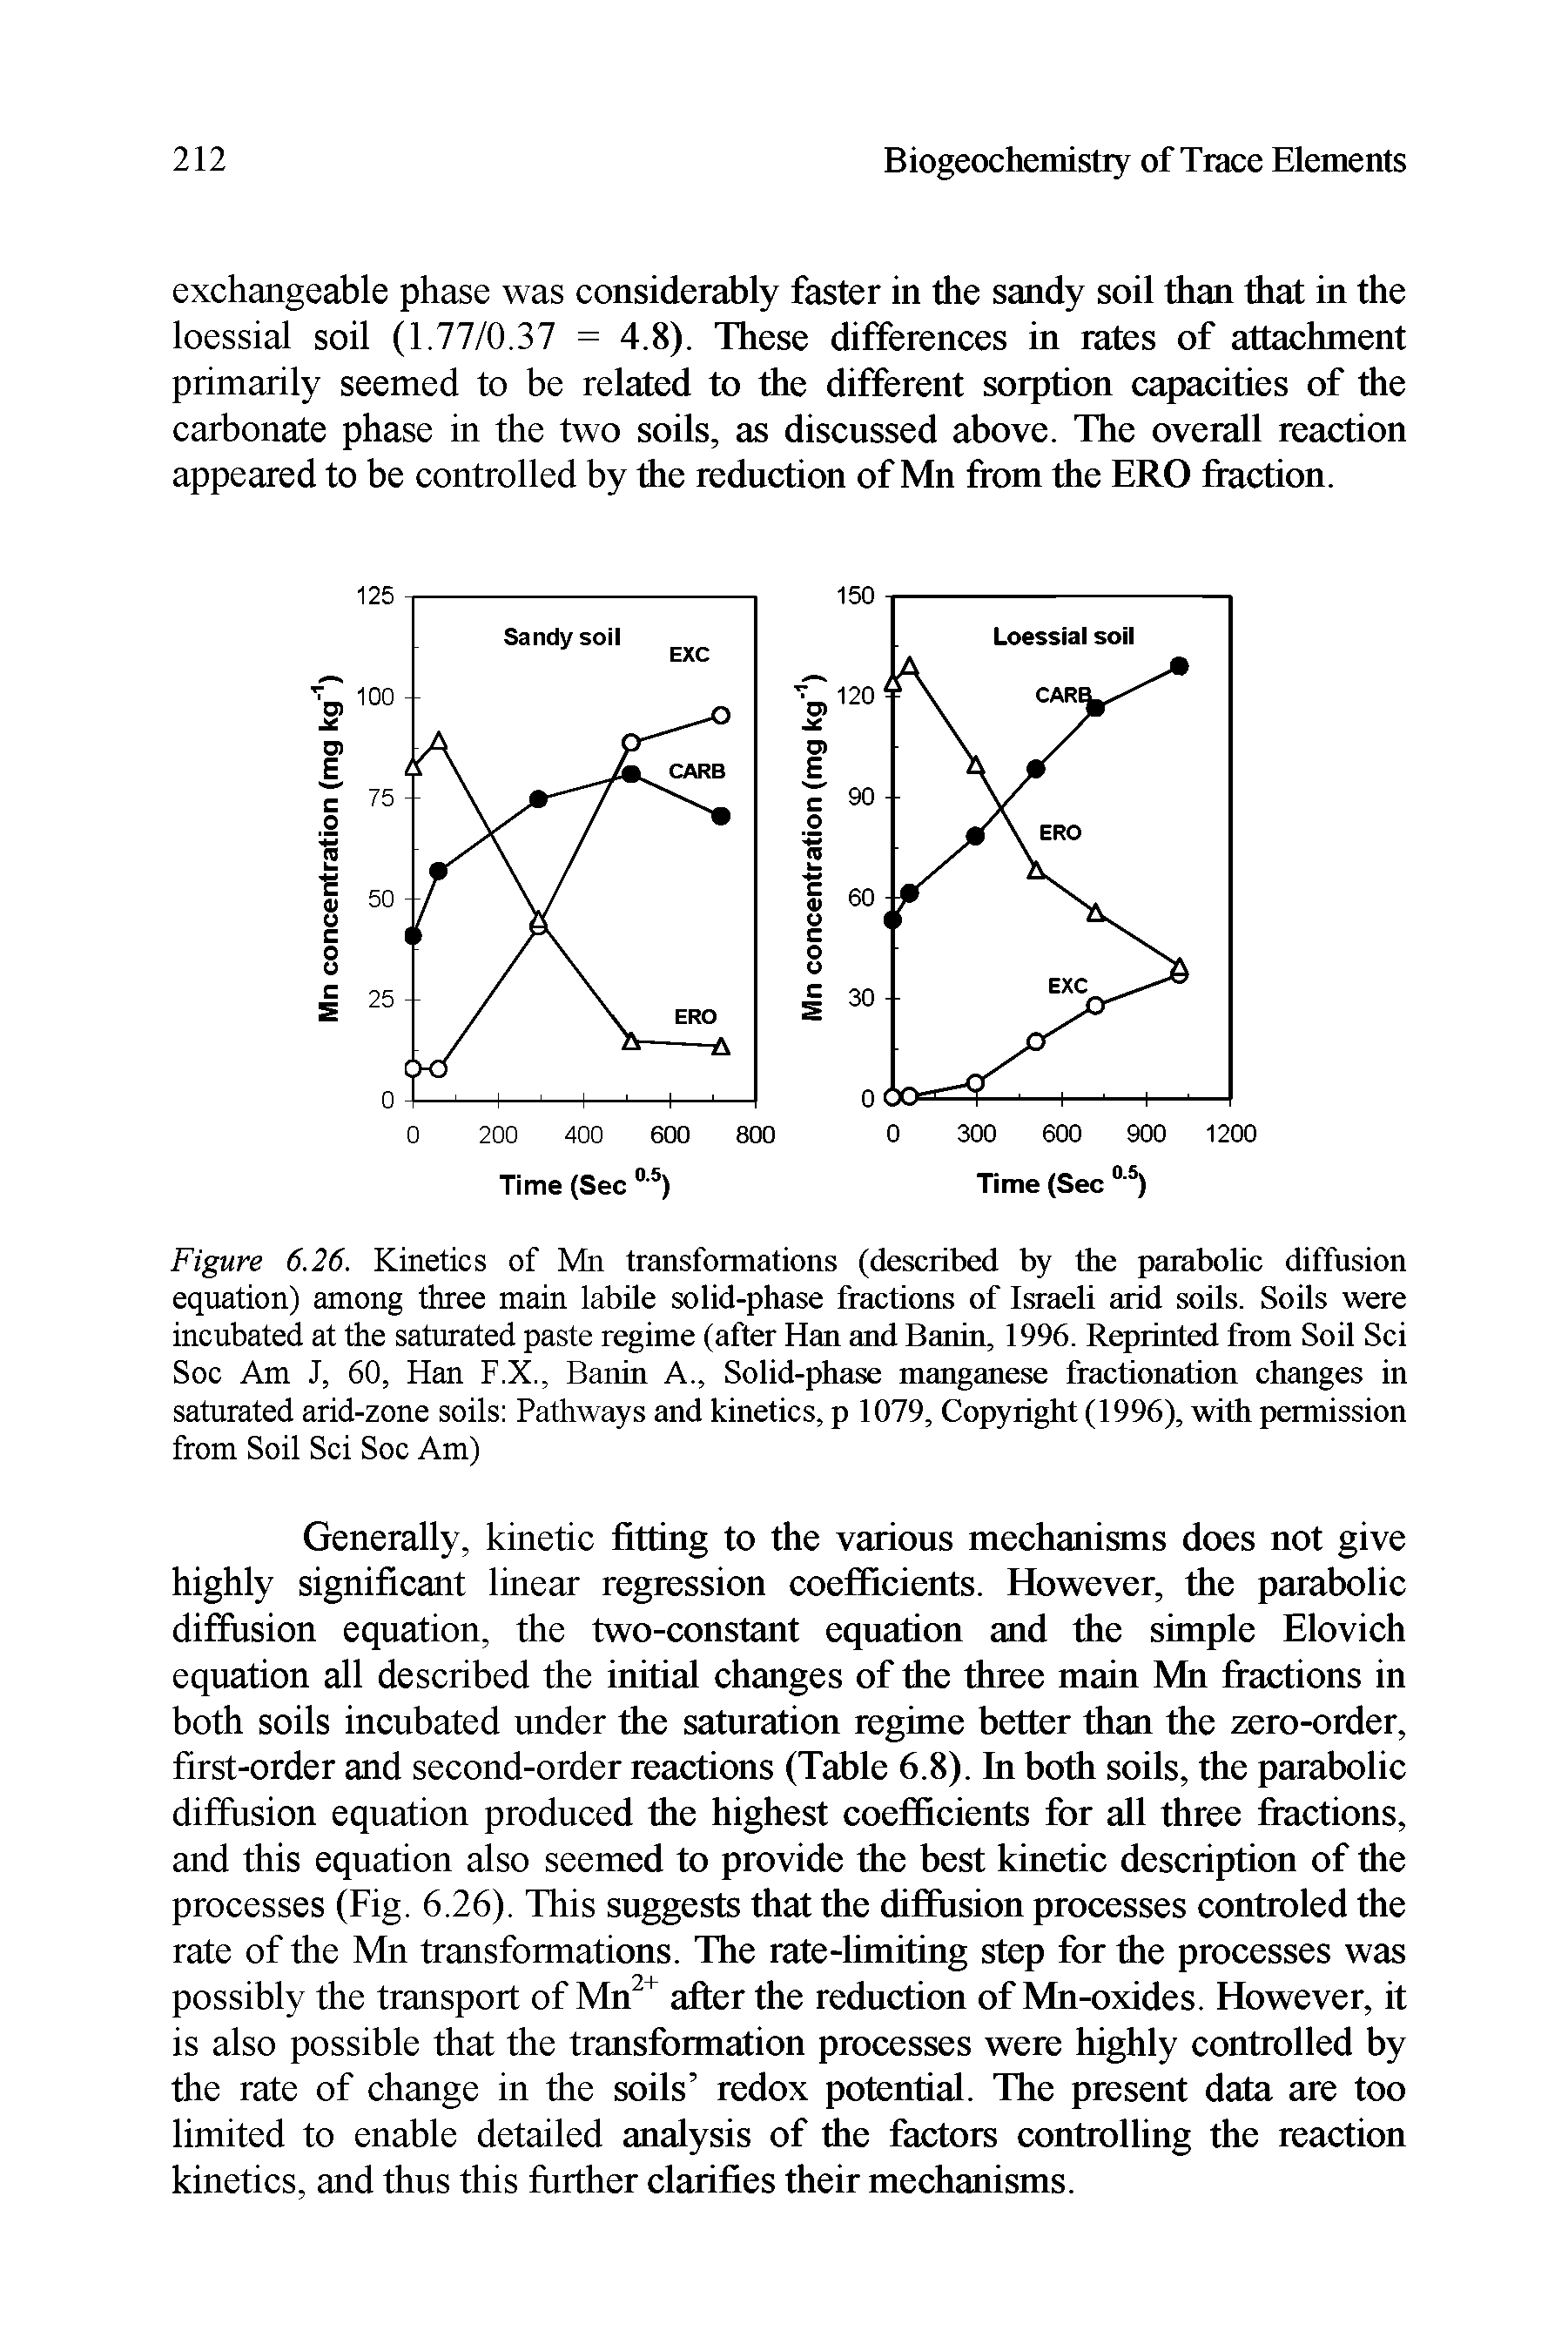 Figure 6.26. Kinetics of Mn transformations (described by the parabolic diffusion equation) among three main labile solid-phase fractions of Israeli arid soils. Soils were incubated at the saturated paste regime (after Han and Banin, 1996. Reprinted from Soil Sci Soc Am J, 60, Han F.X., Banin A., Solid-phase manganese fractionation changes in saturated arid-zone soils Pathways and kinetics, p 1079, Copyright (1996), with permission from Soil Sci Soc Am)...